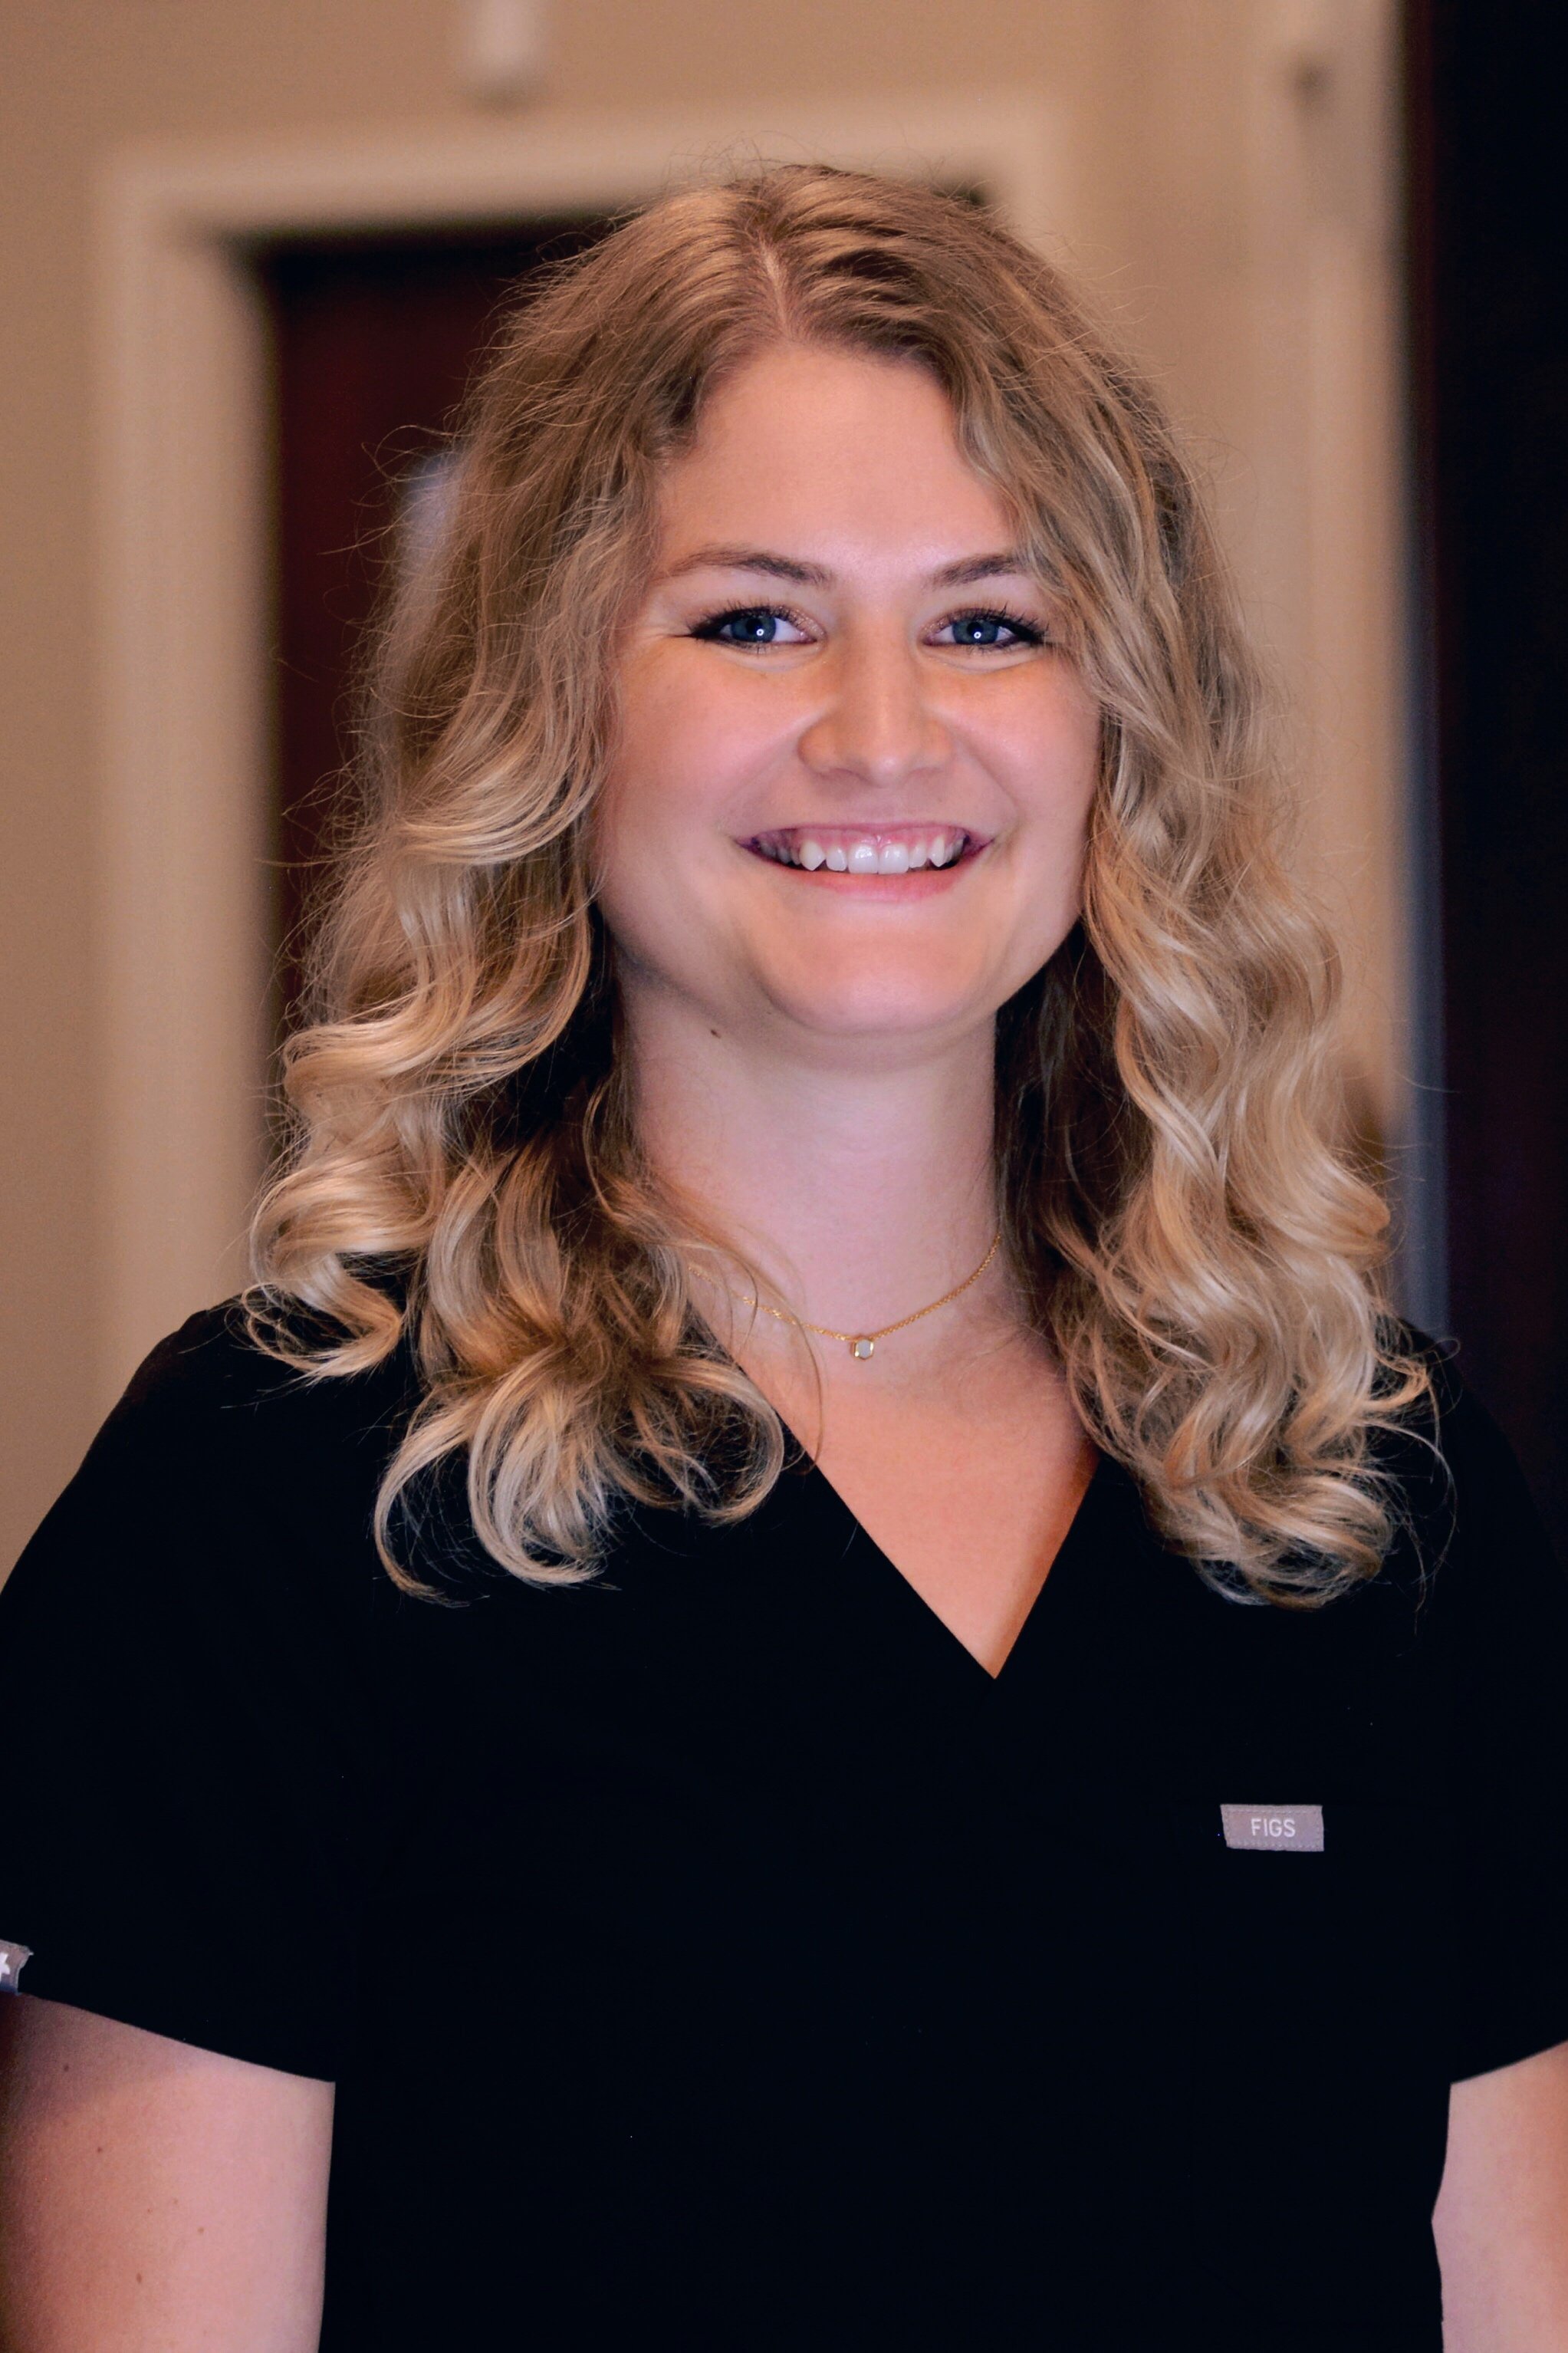 Whitney Zimmerman, #Medical Assistant